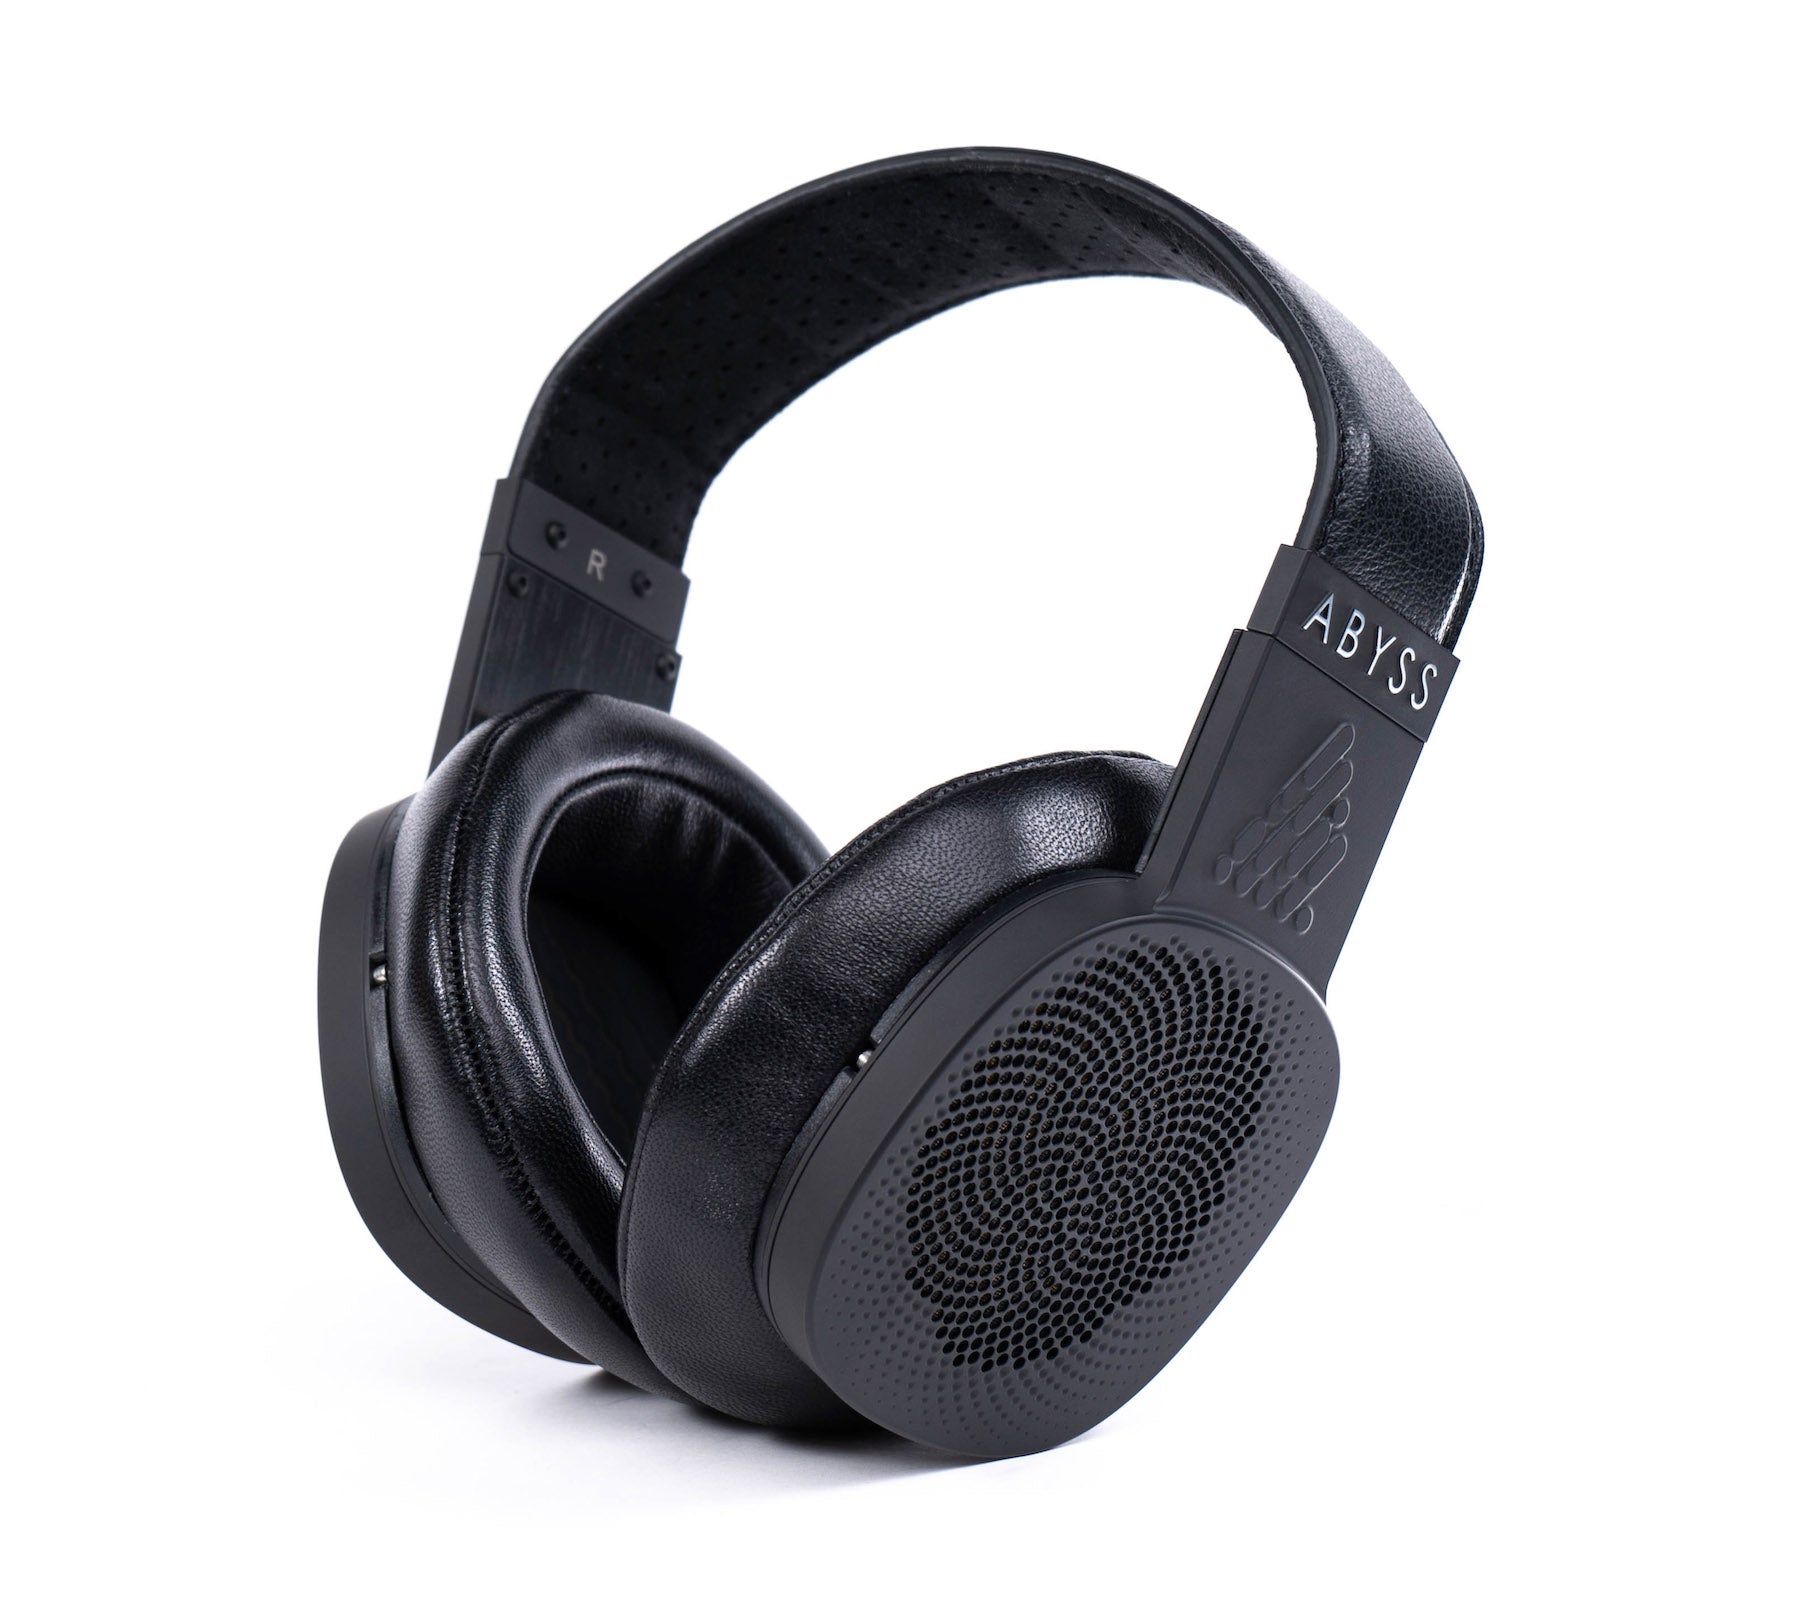 SALE! DIANA V2 Luxury Headphones by ABYSS- Found In Warehouse Sale!